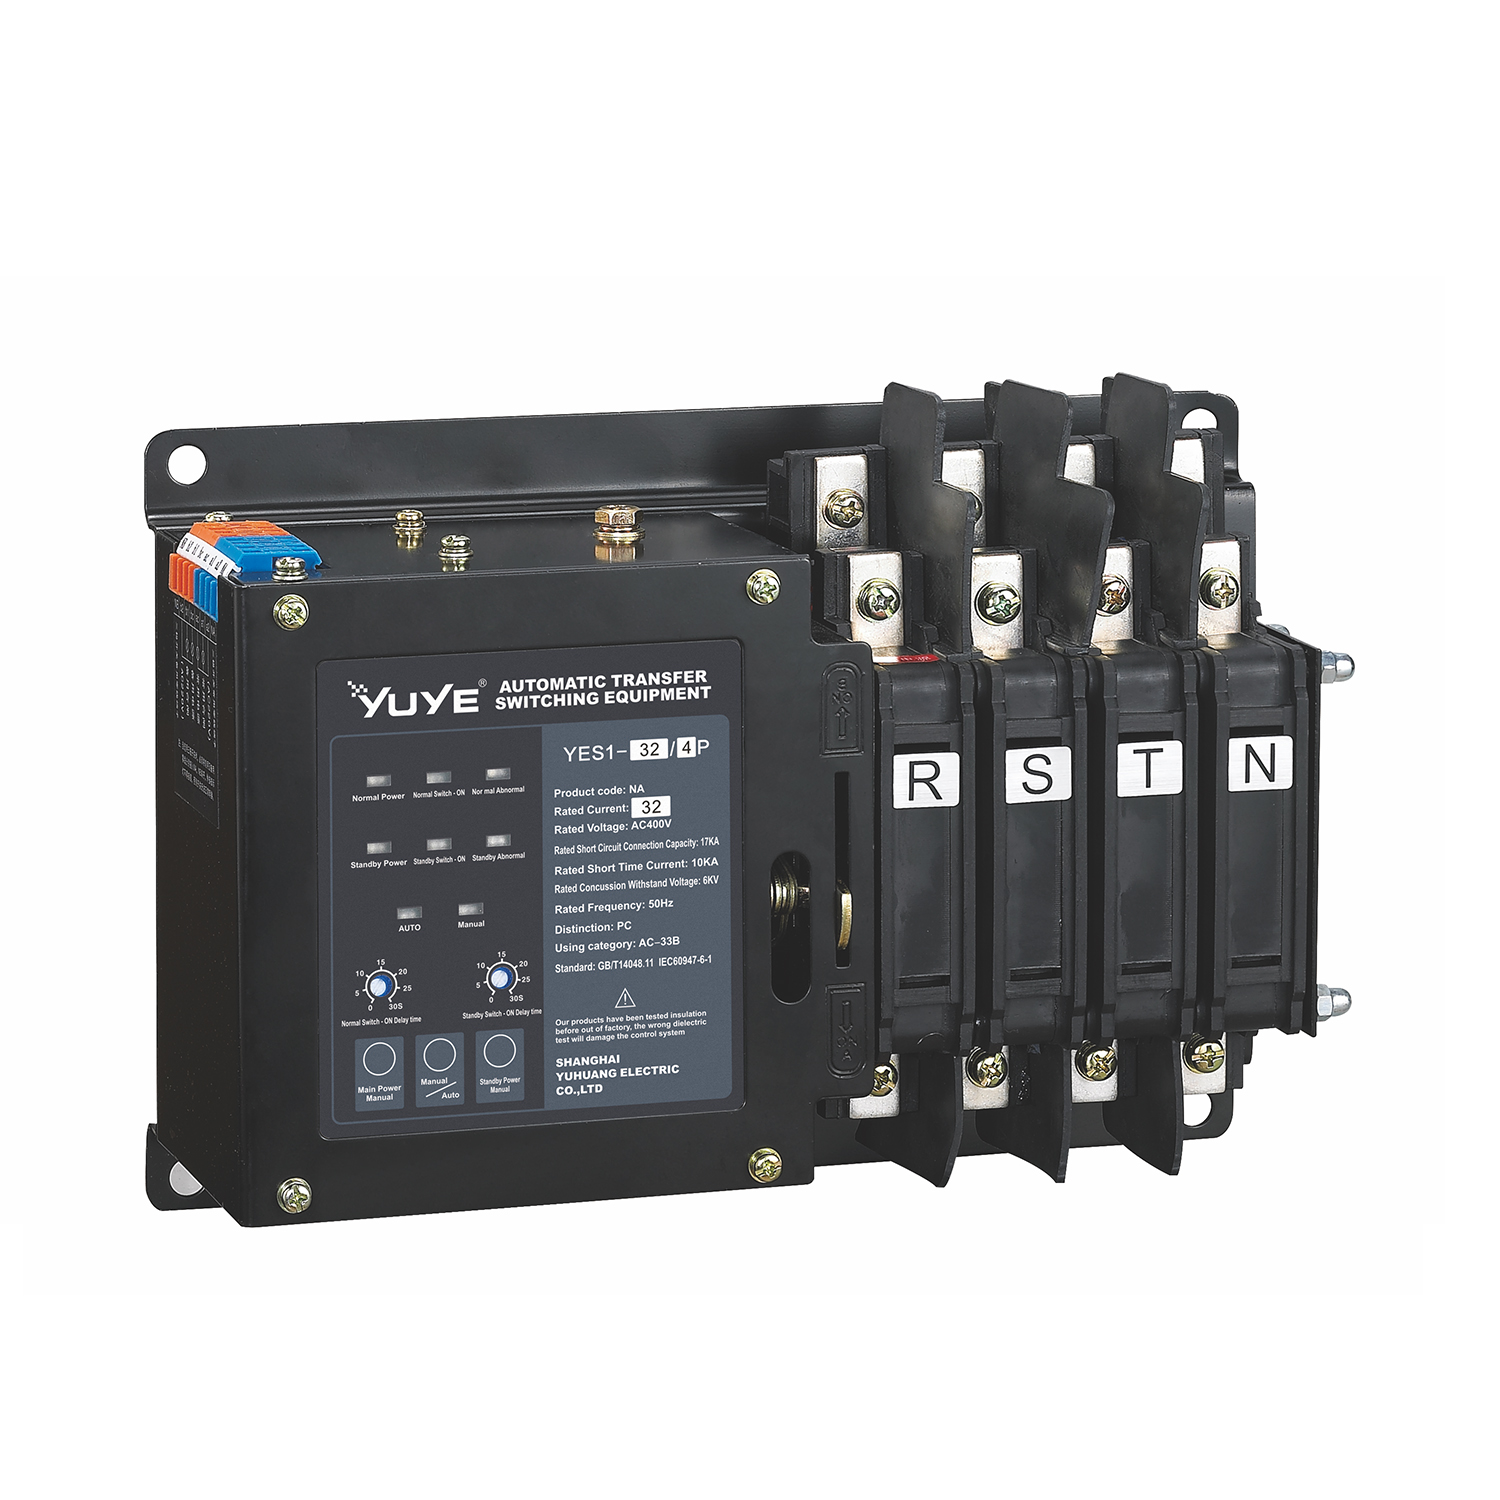 The ultimate transfer switch solution for uninterruptible power supplies